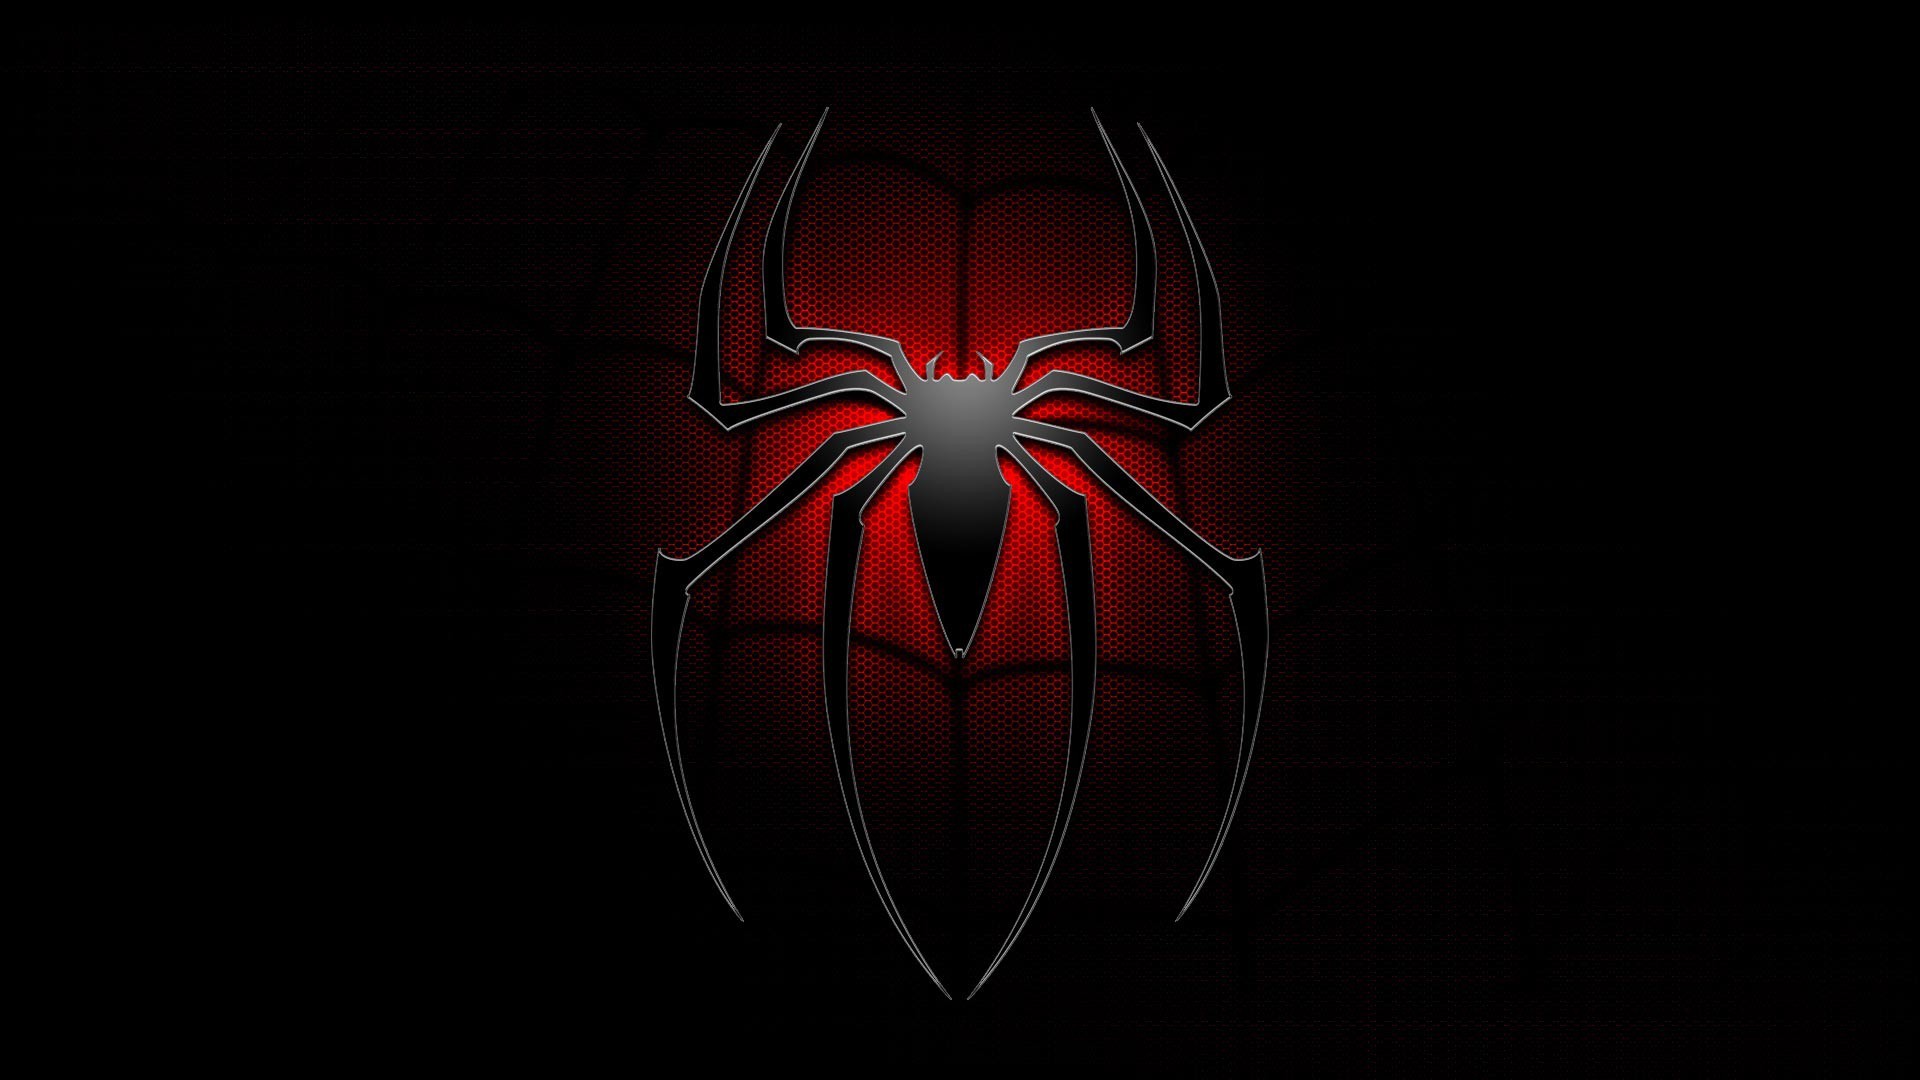 1920x1080 Collection of Spiderman Hd Wallpaper on HDWallpapers 1920Ã1080